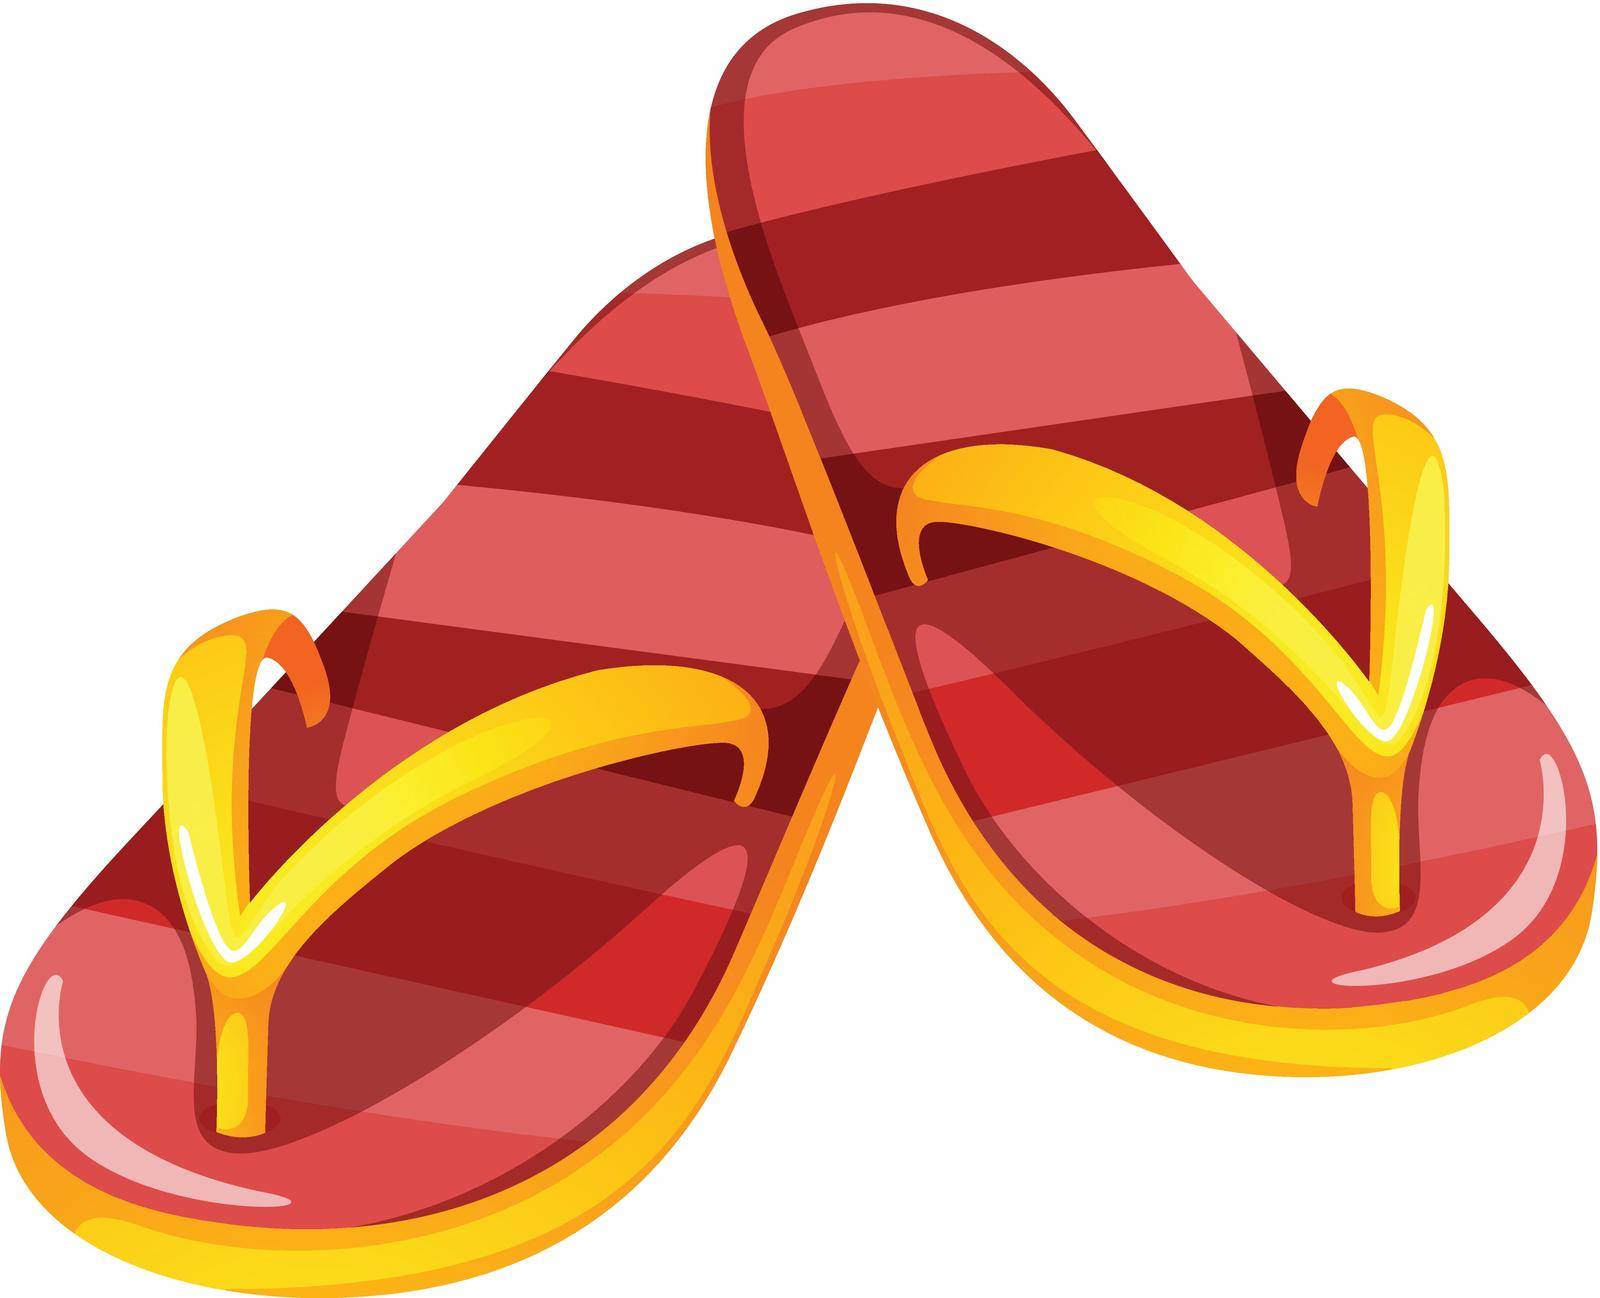 Illustration of a pair of sandals on a white background